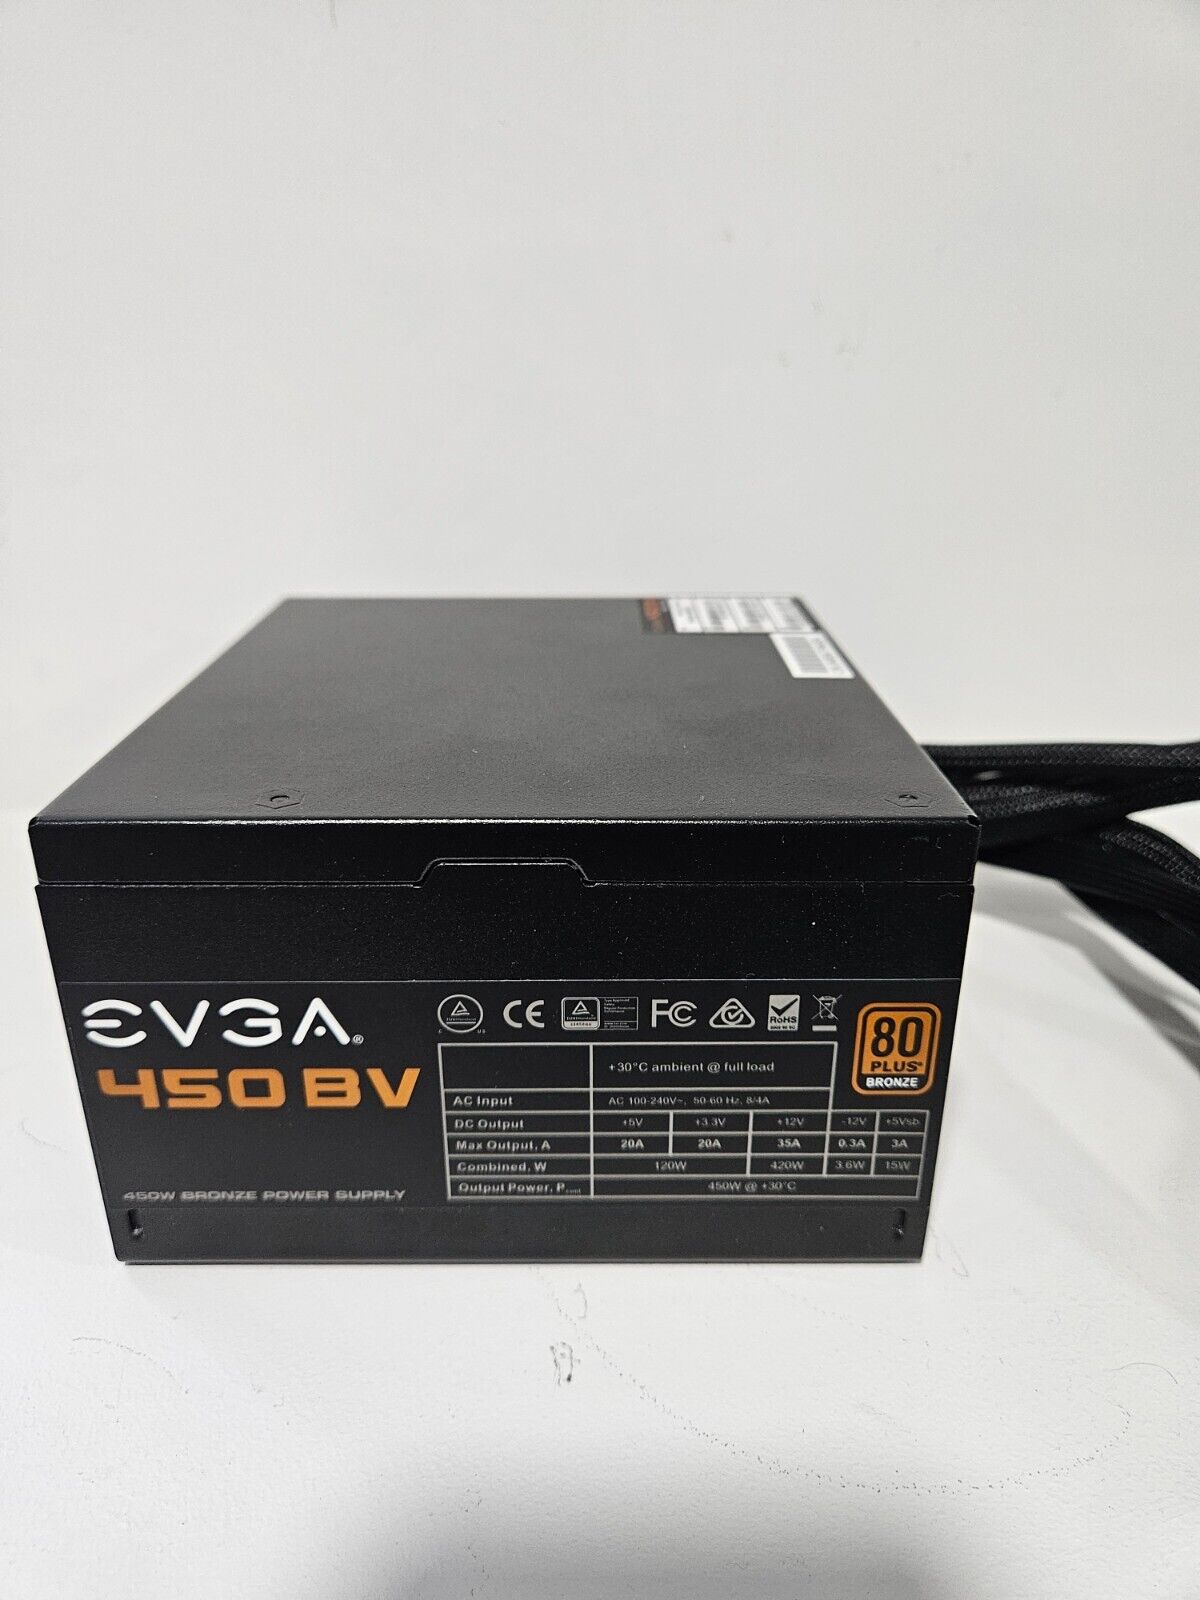 EVGA 450W BV 80 PLUS Bronze Power supply | Used in good working condition